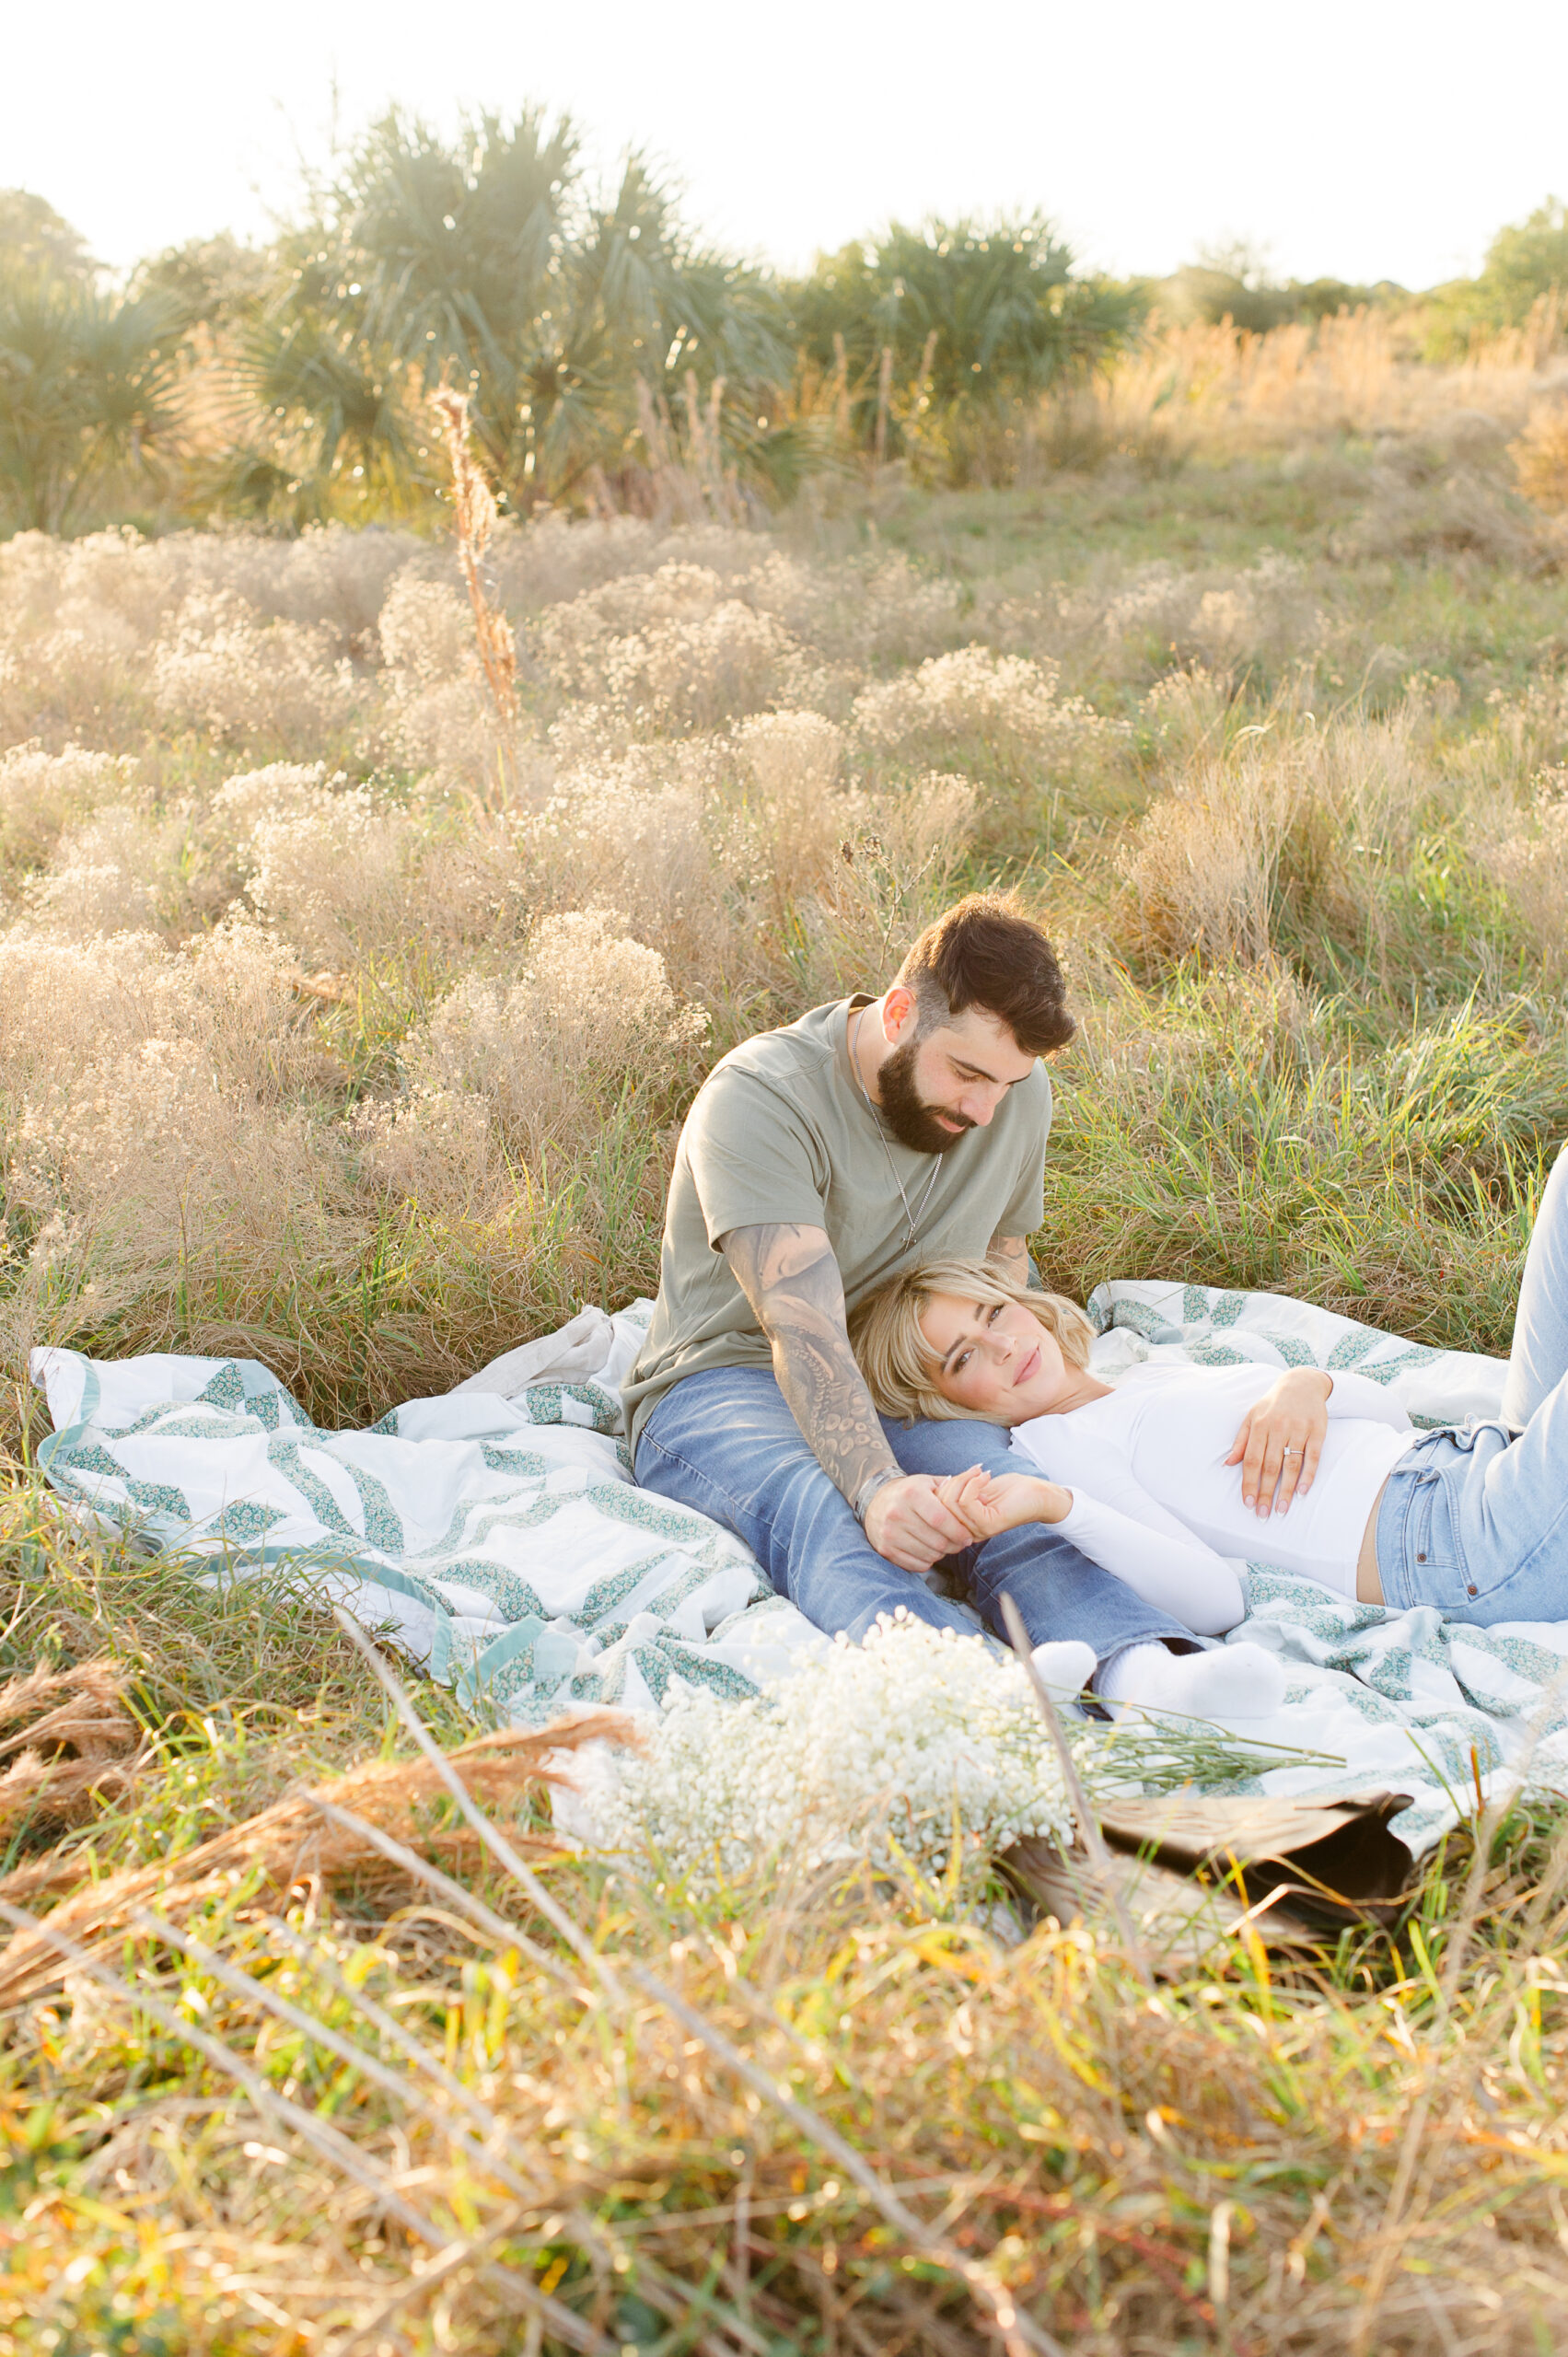 Couple laying in a tall grass field on a blanket given to her by her grandmother celebrating their new engagement with Orlando engagement photographer M. Lauren spas in Orlando